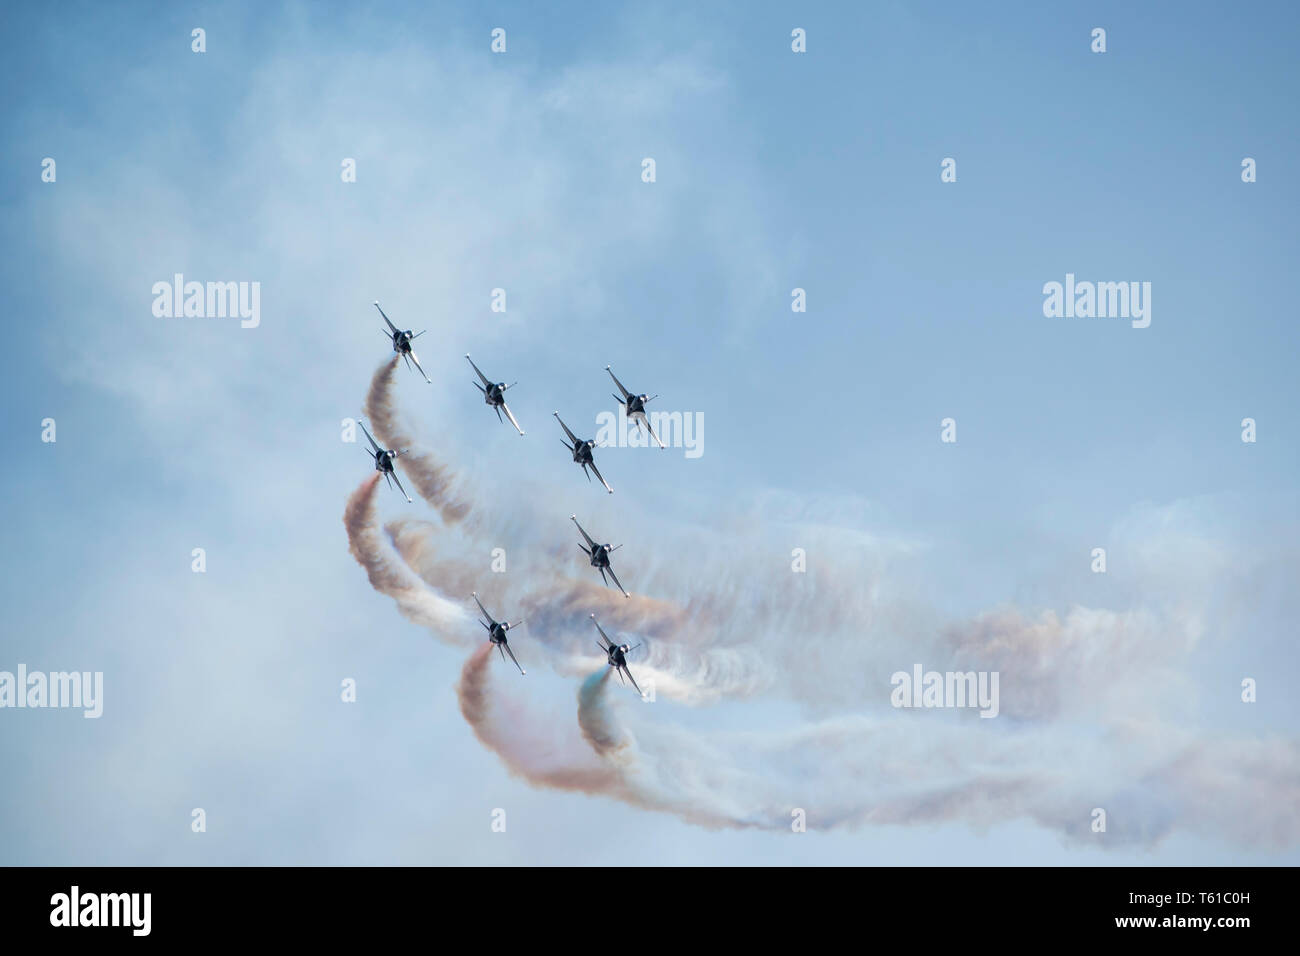 Airplane trails on blue sky with copy space. Stock Photo